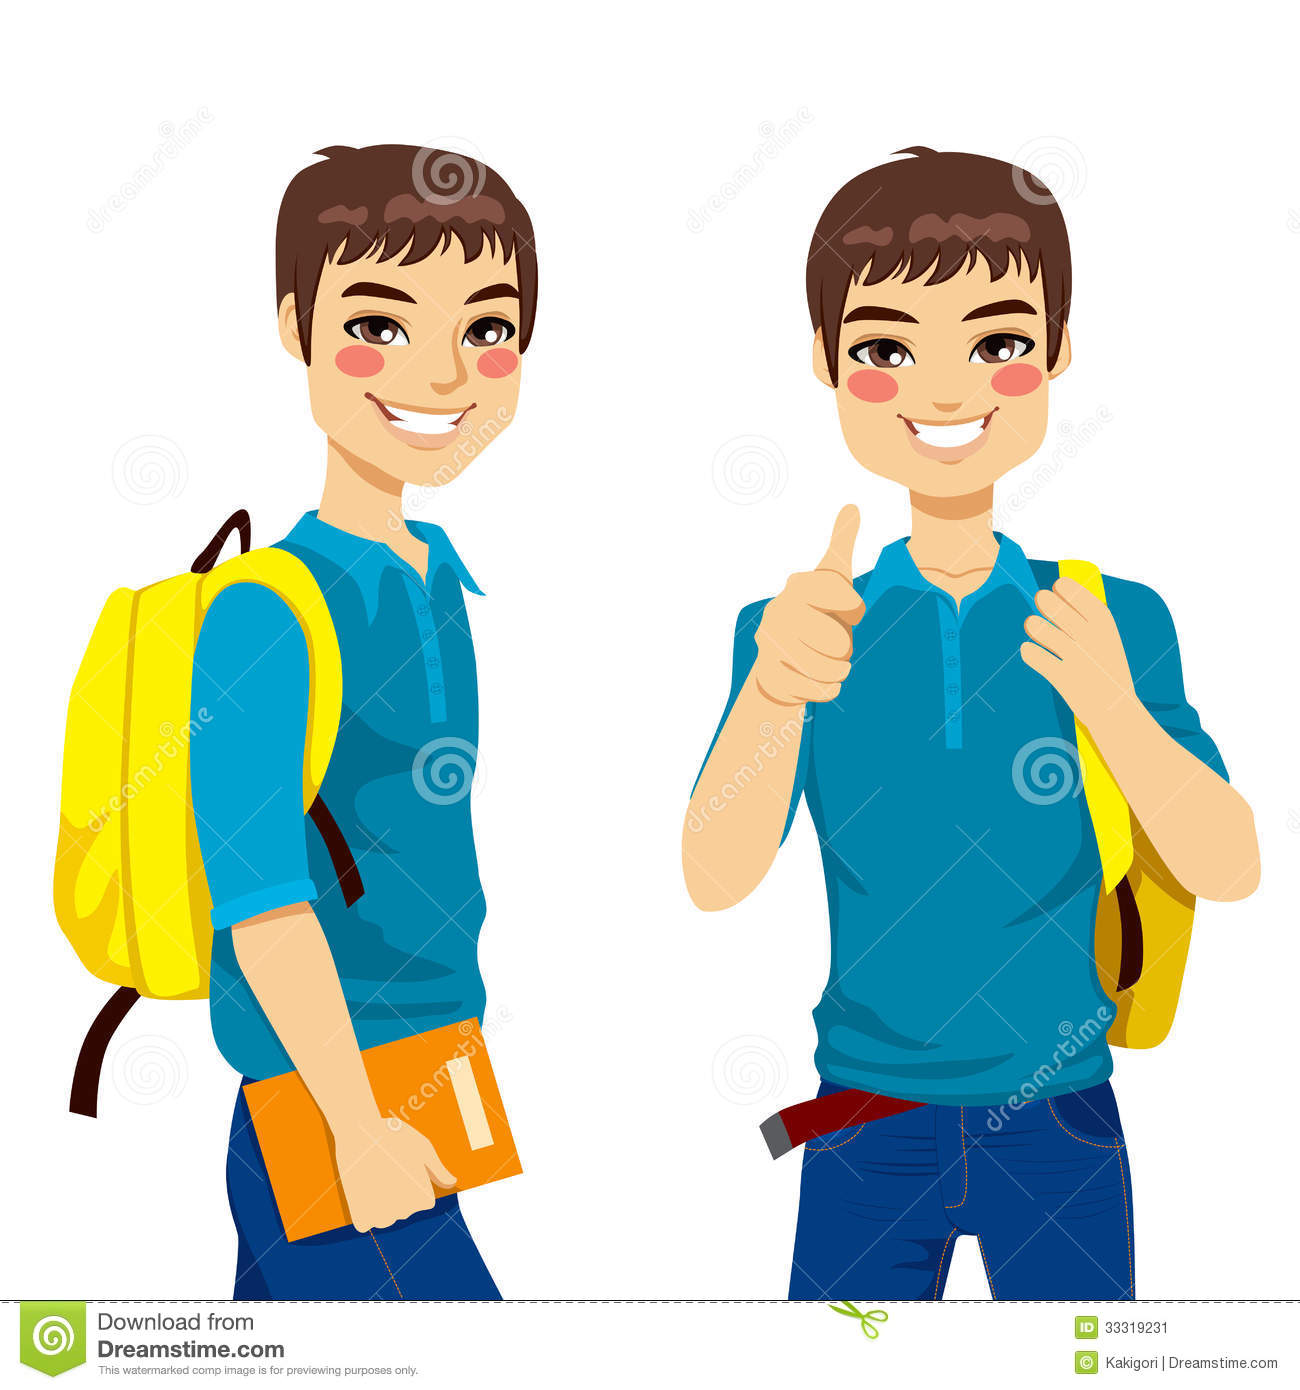 College students clipart.